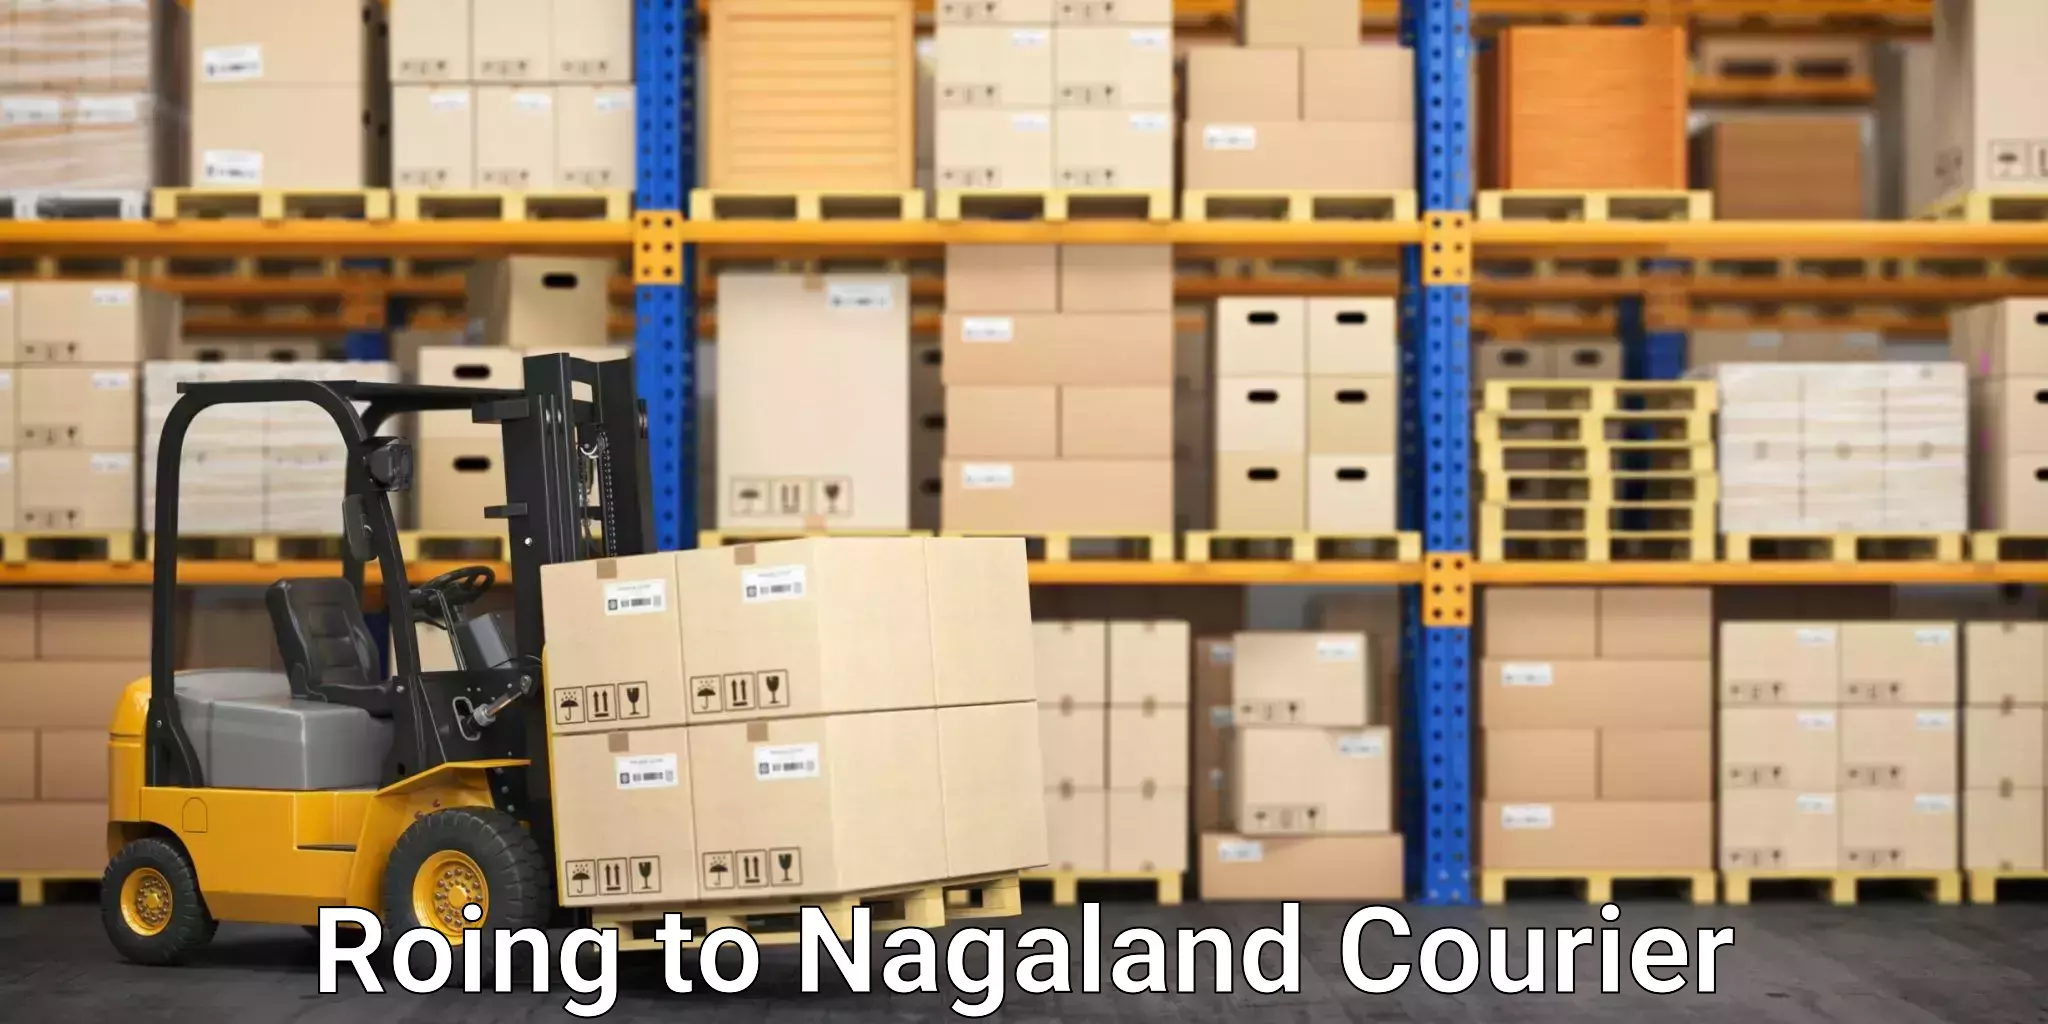 Efficient order fulfillment Roing to Nagaland